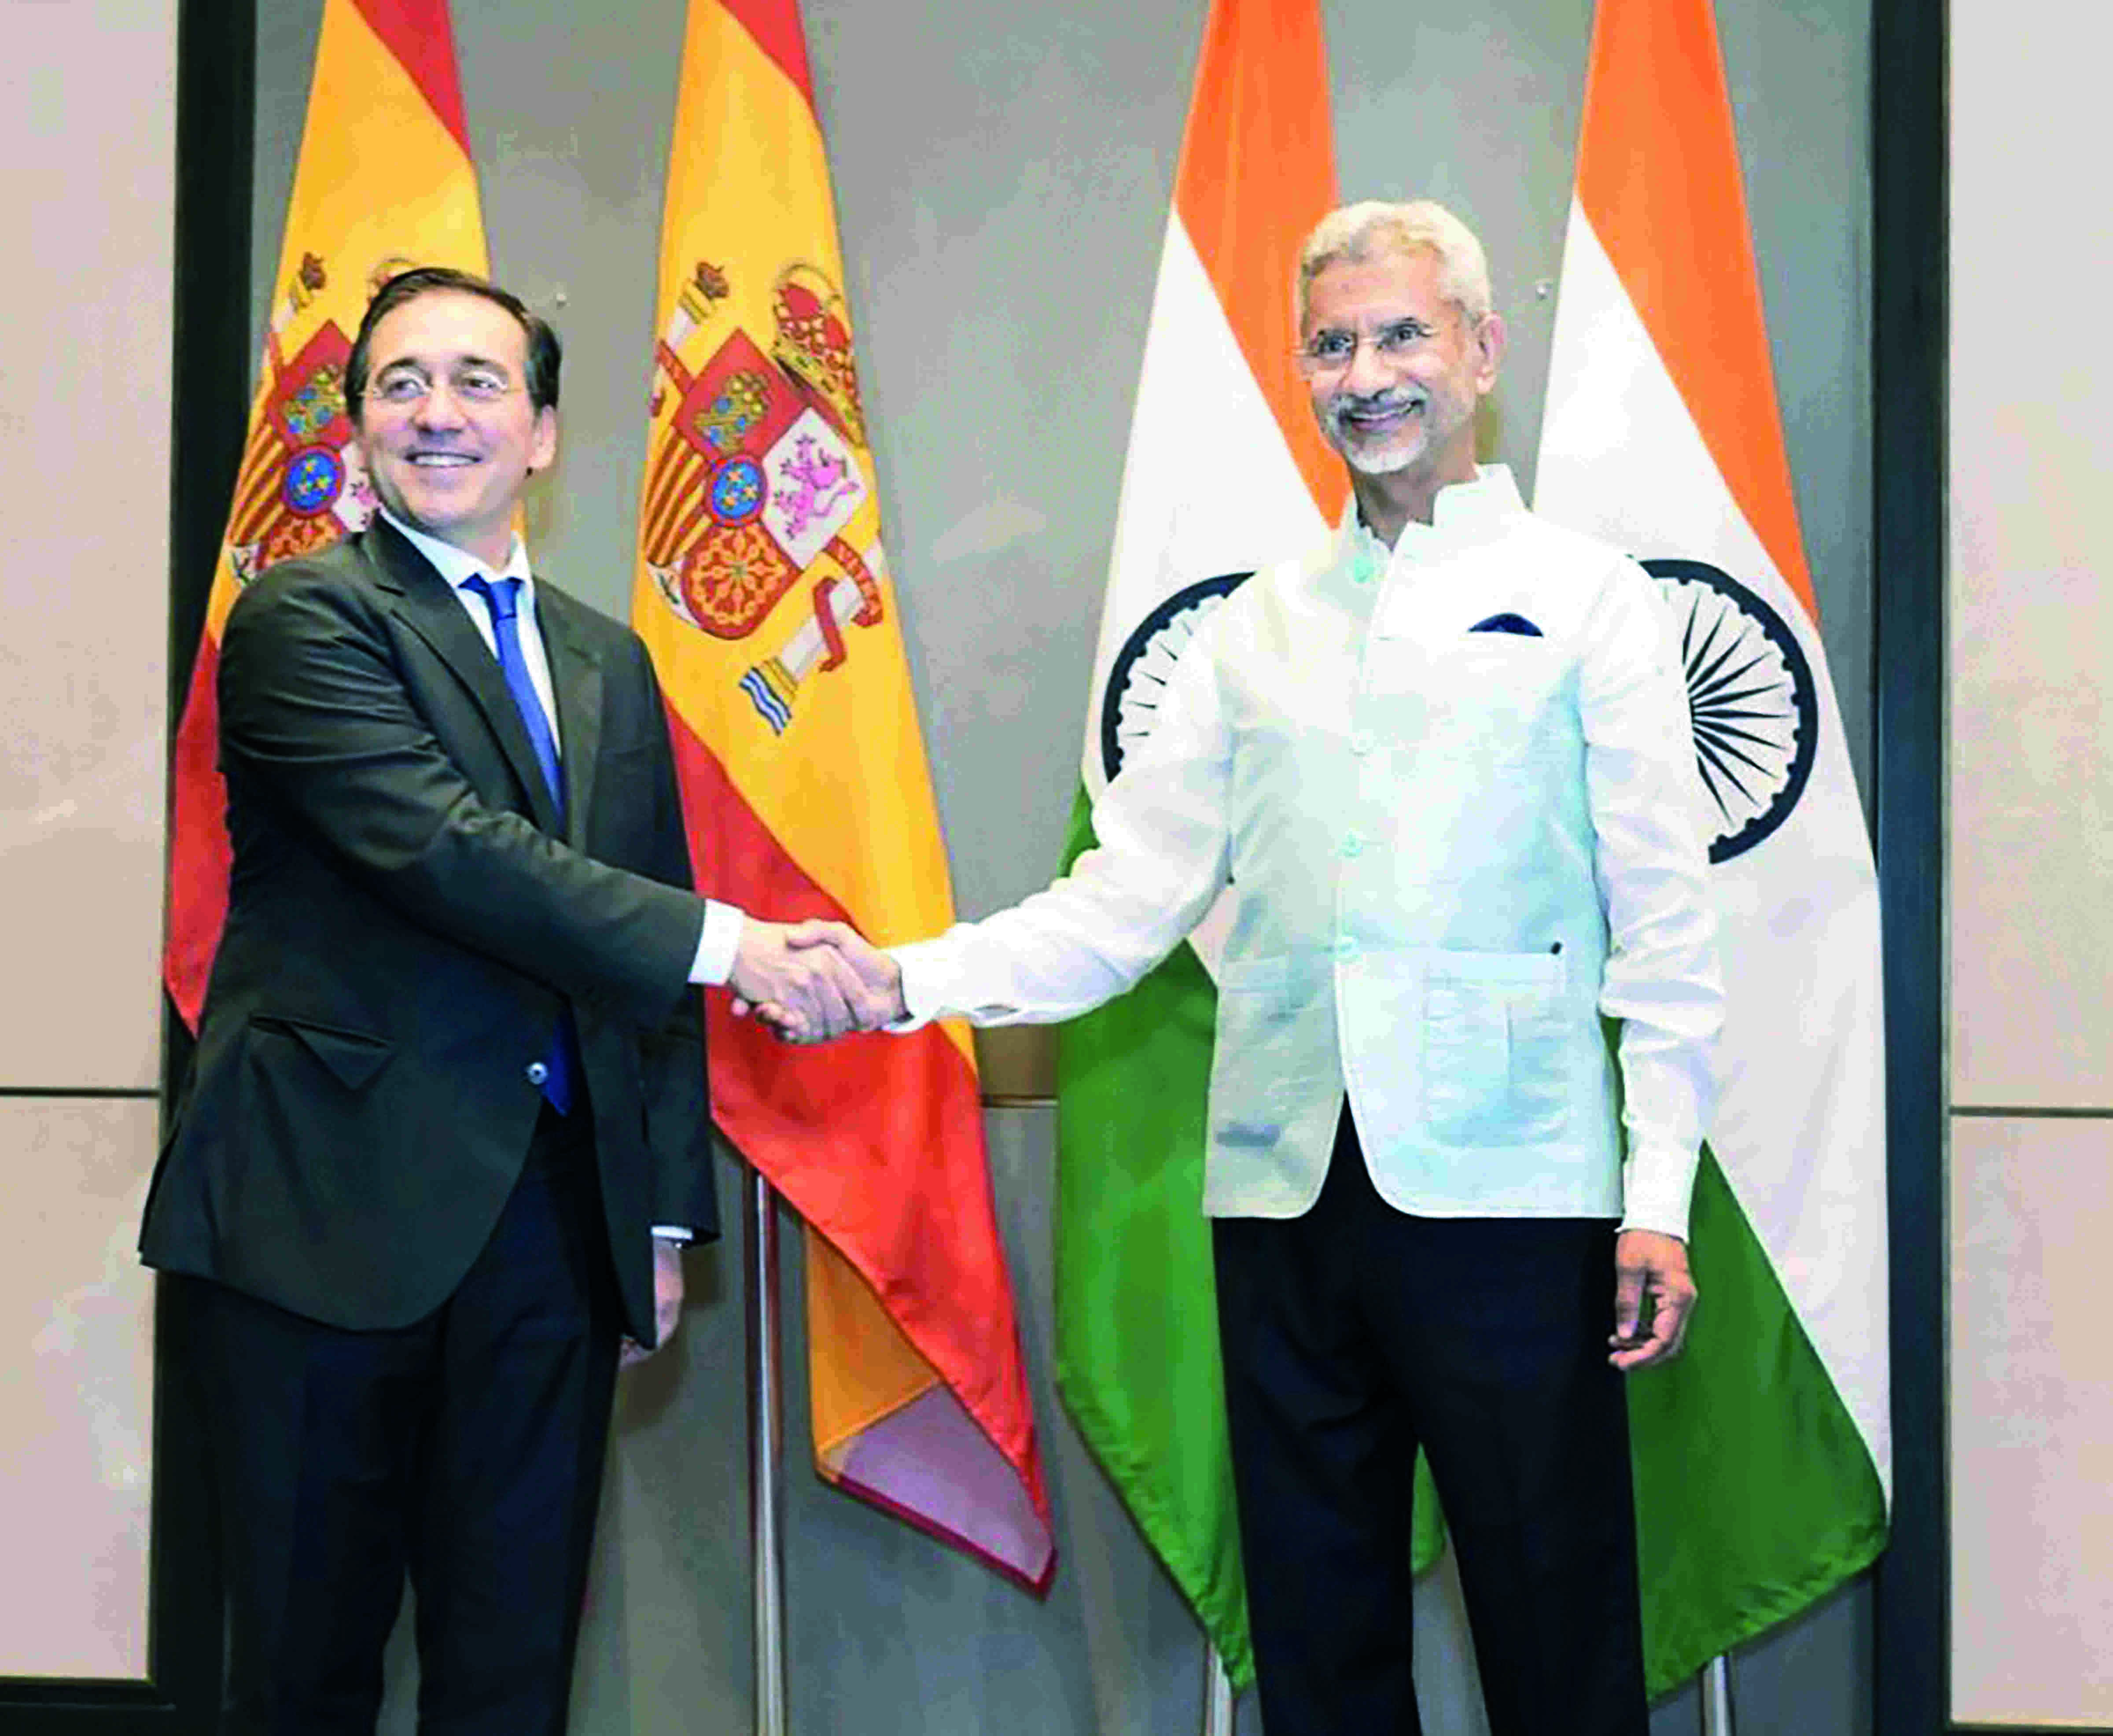 India and Spain agree to add new depth & content to ties